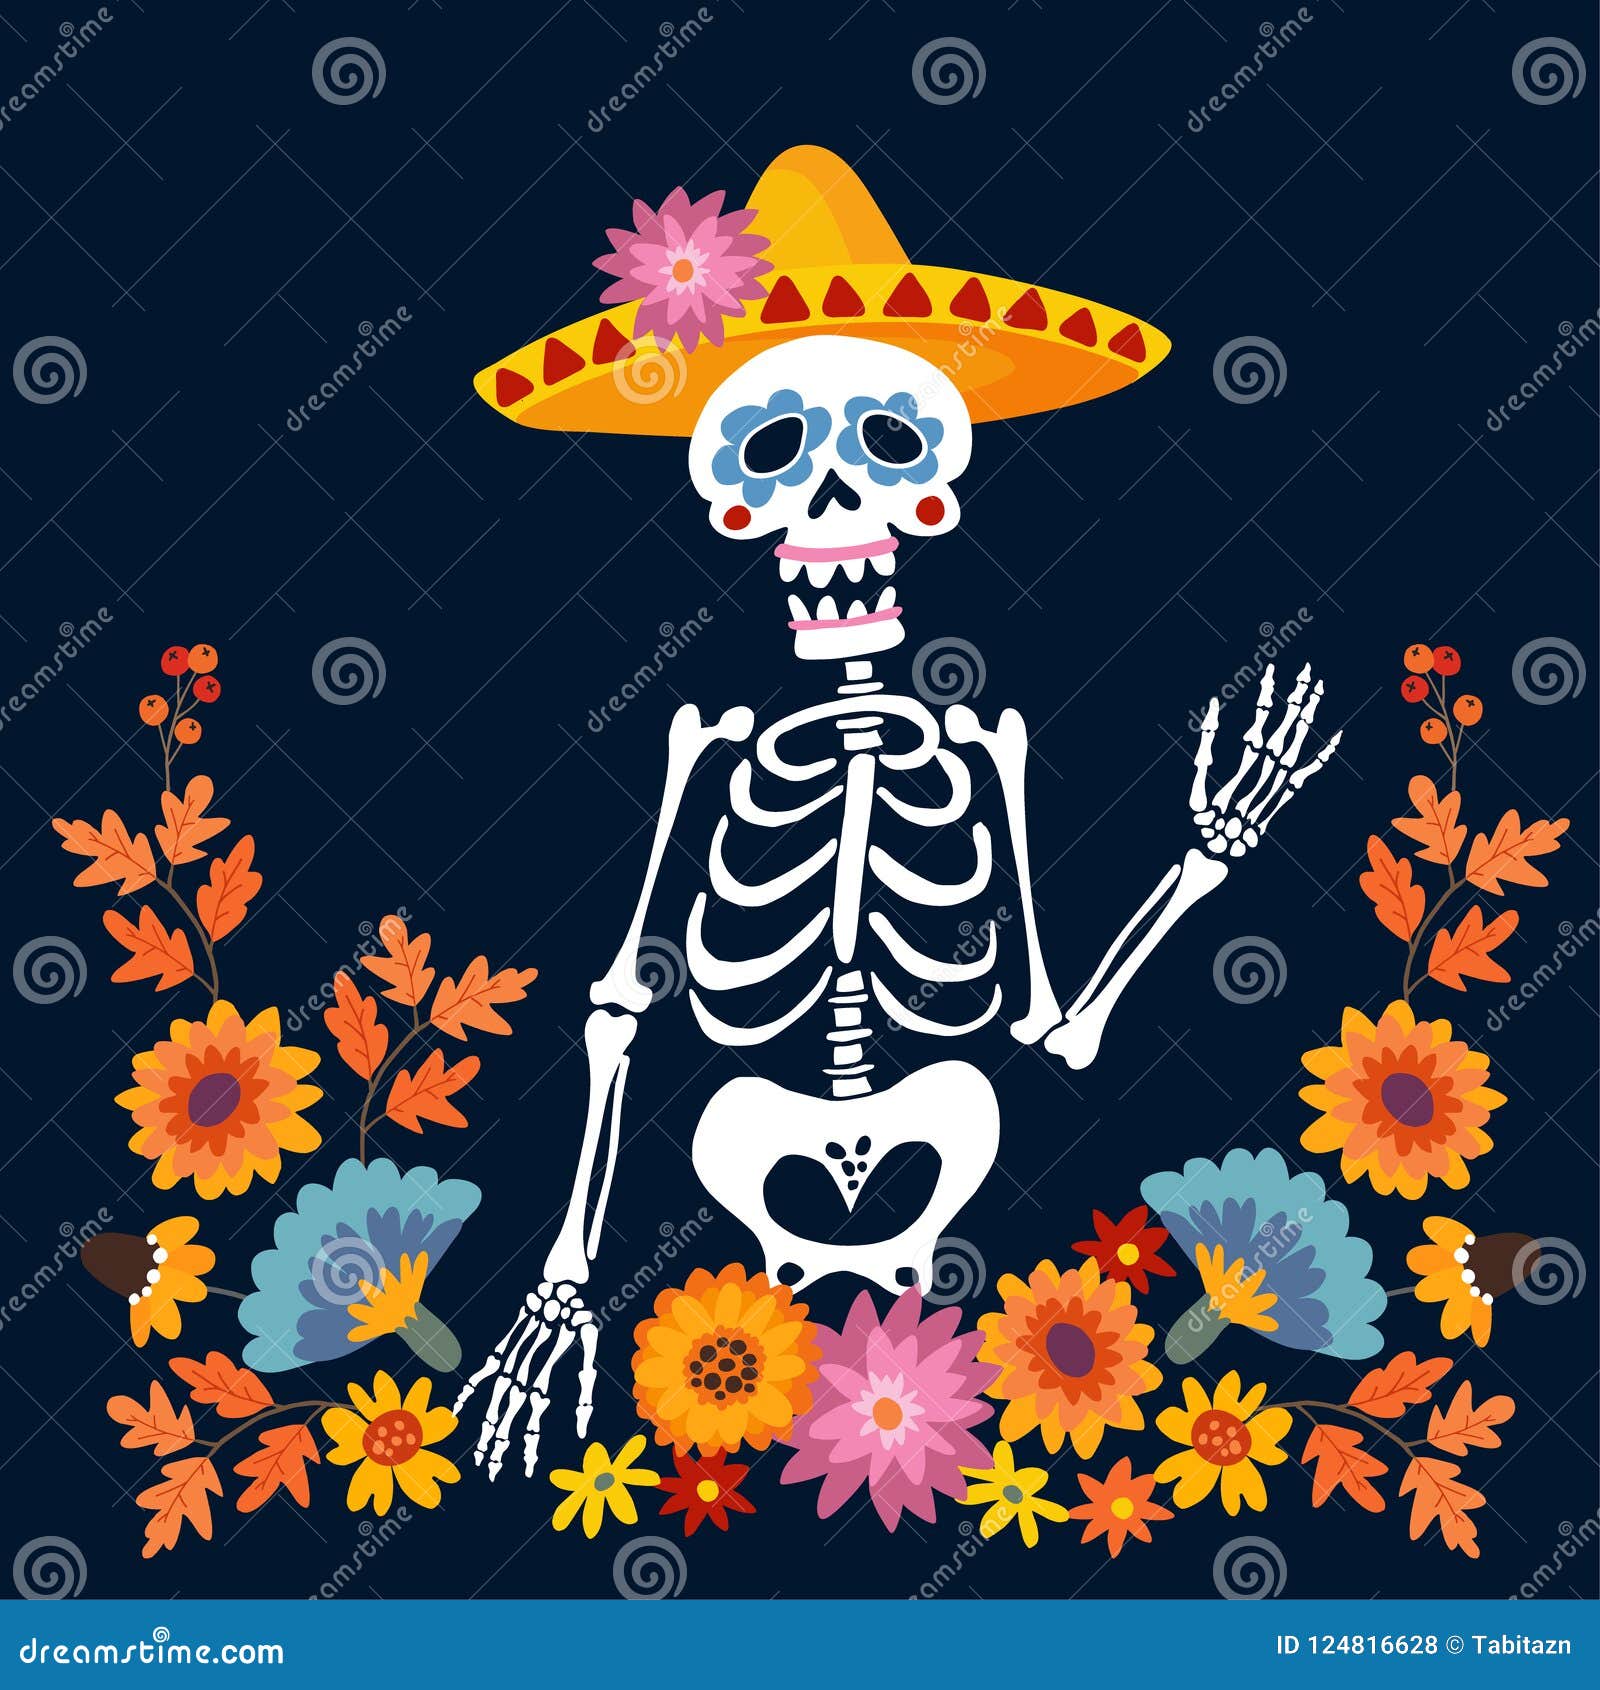 dia de los muertos greeting card, invitation. mexican day of the dead. skeleton with sombrero hat and floral frame